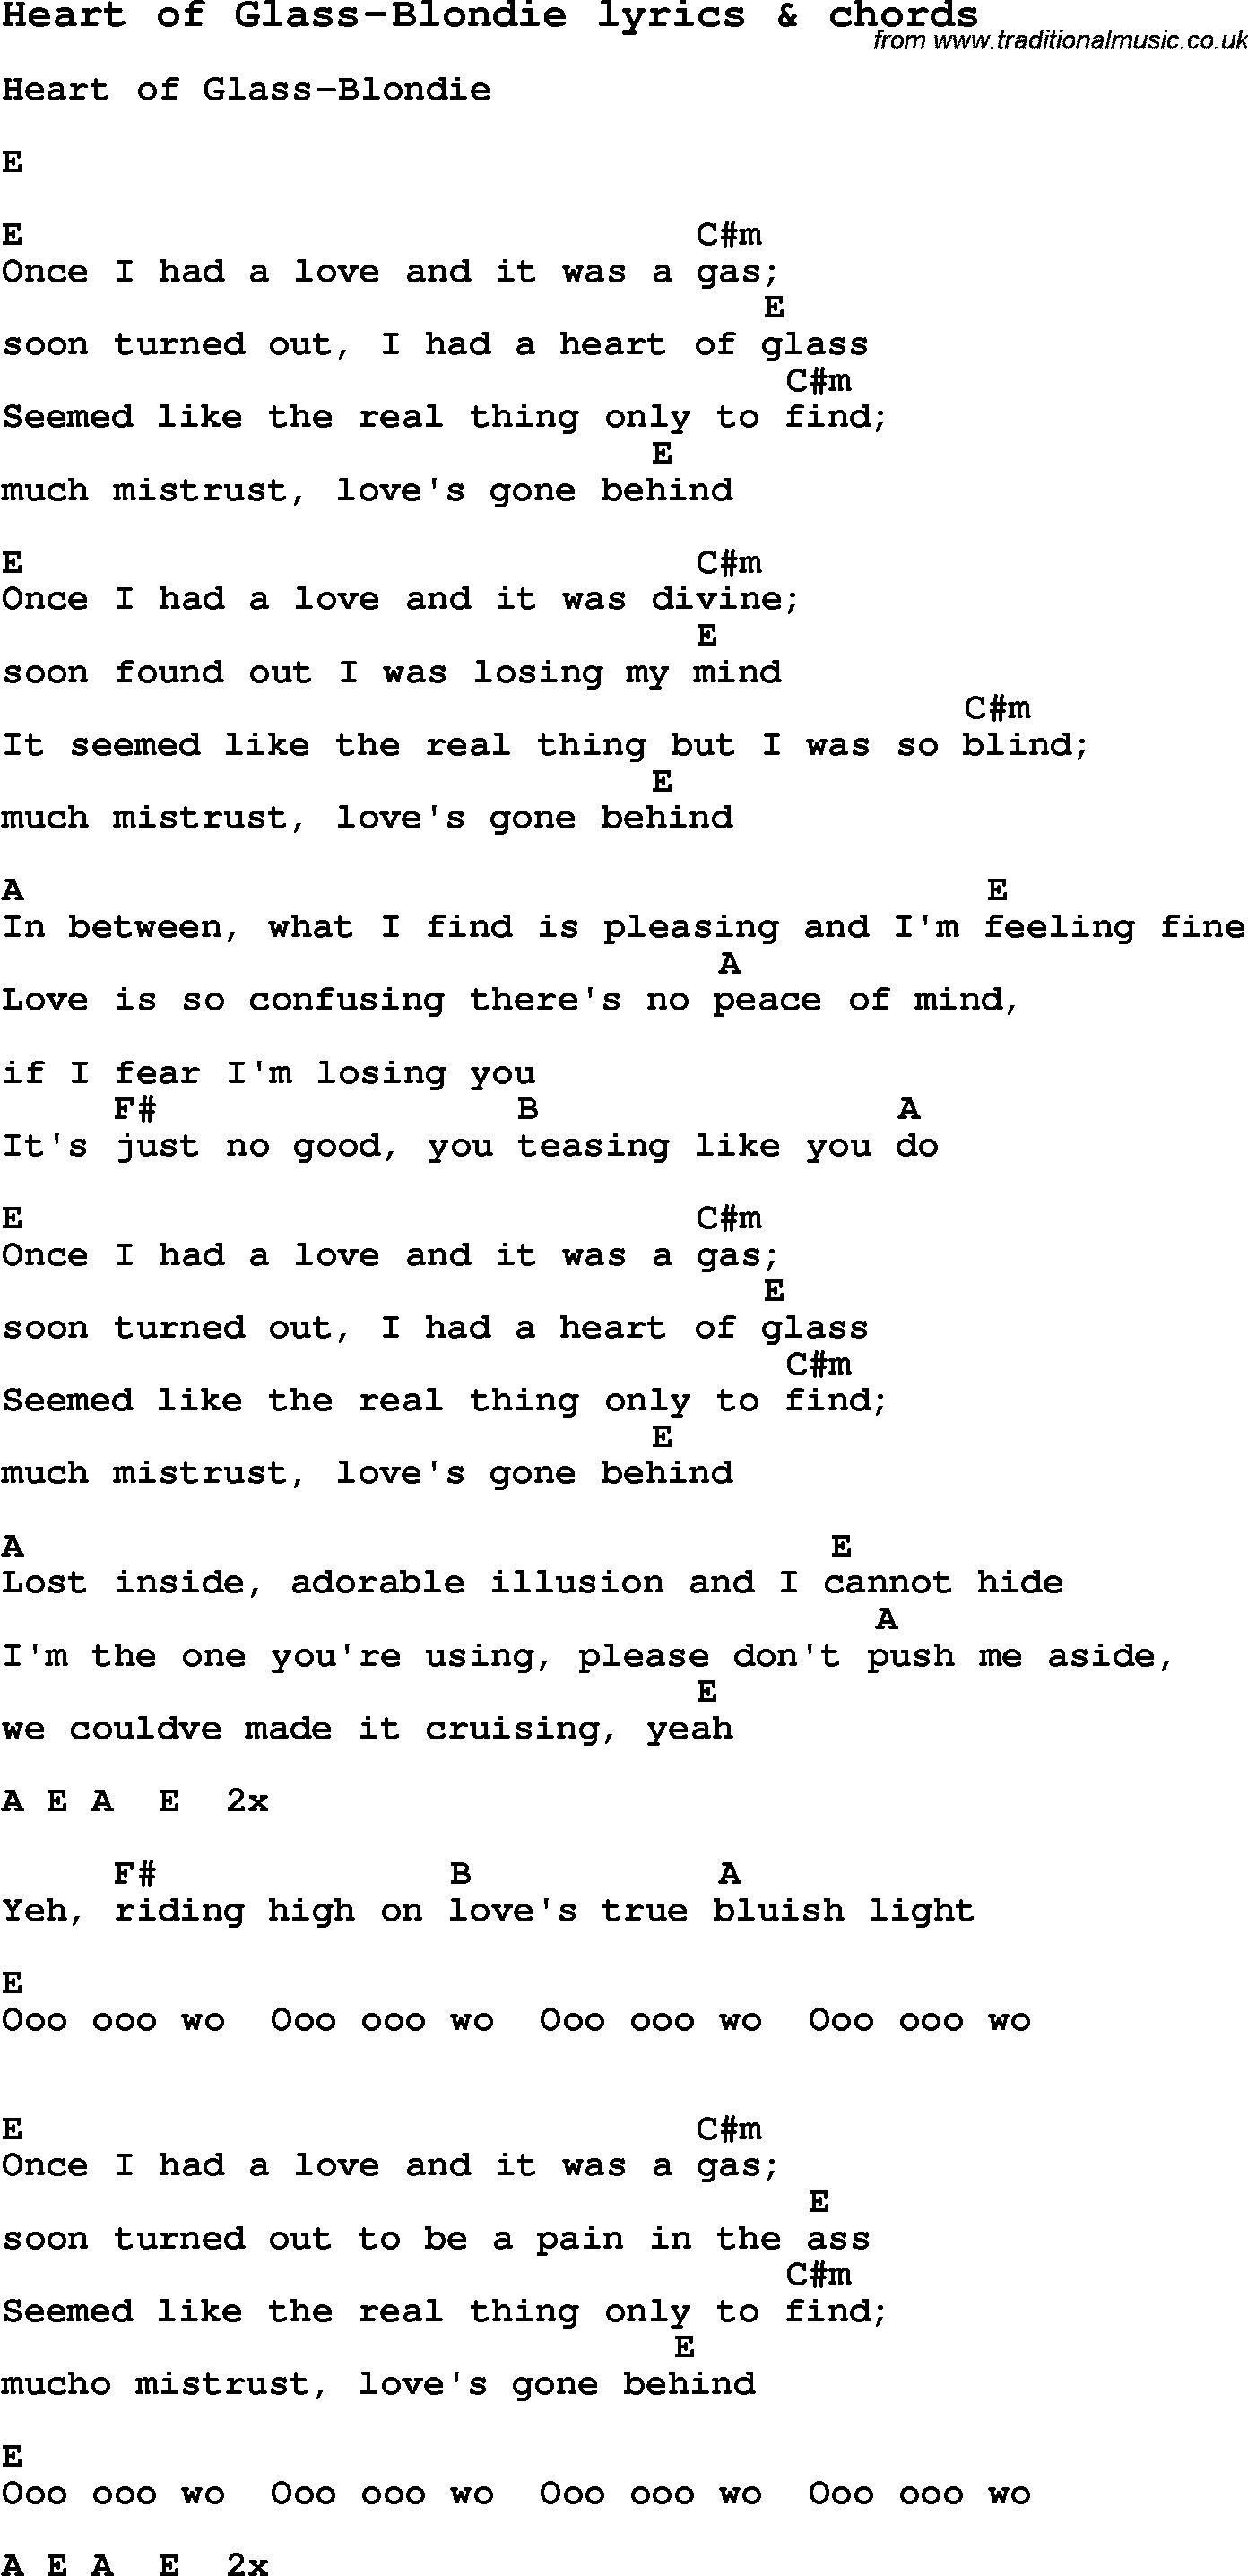 Love Song Lyrics for: Heart of Glass-Blondie with chords for Ukulele, Guitar Banjo etc.